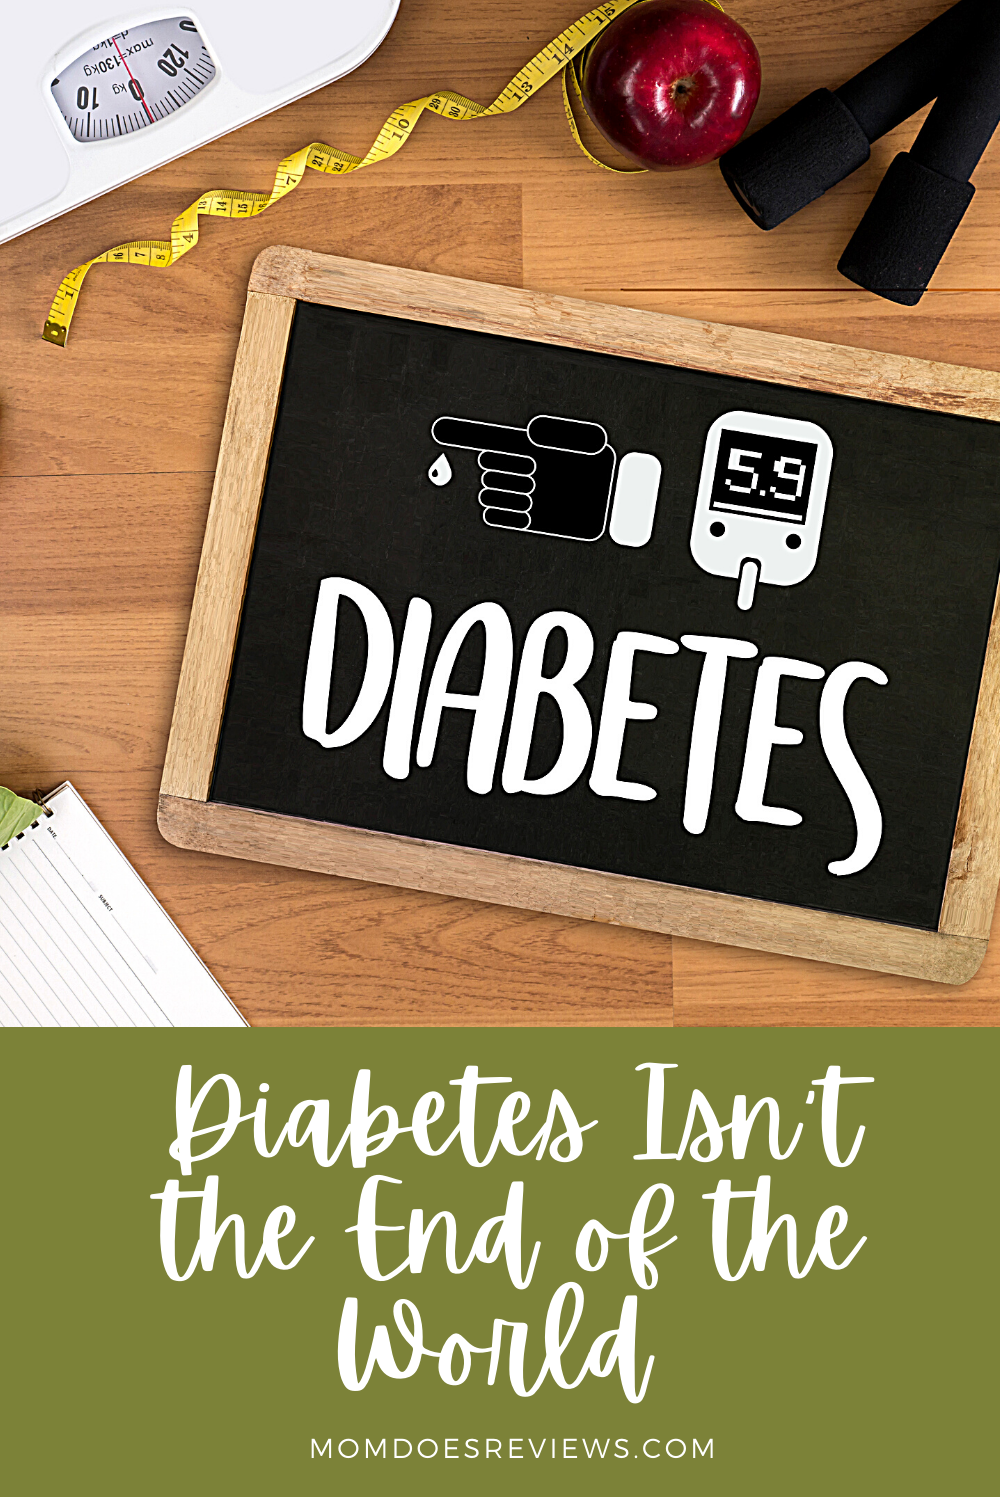 Diabetes Isn't the End of the World